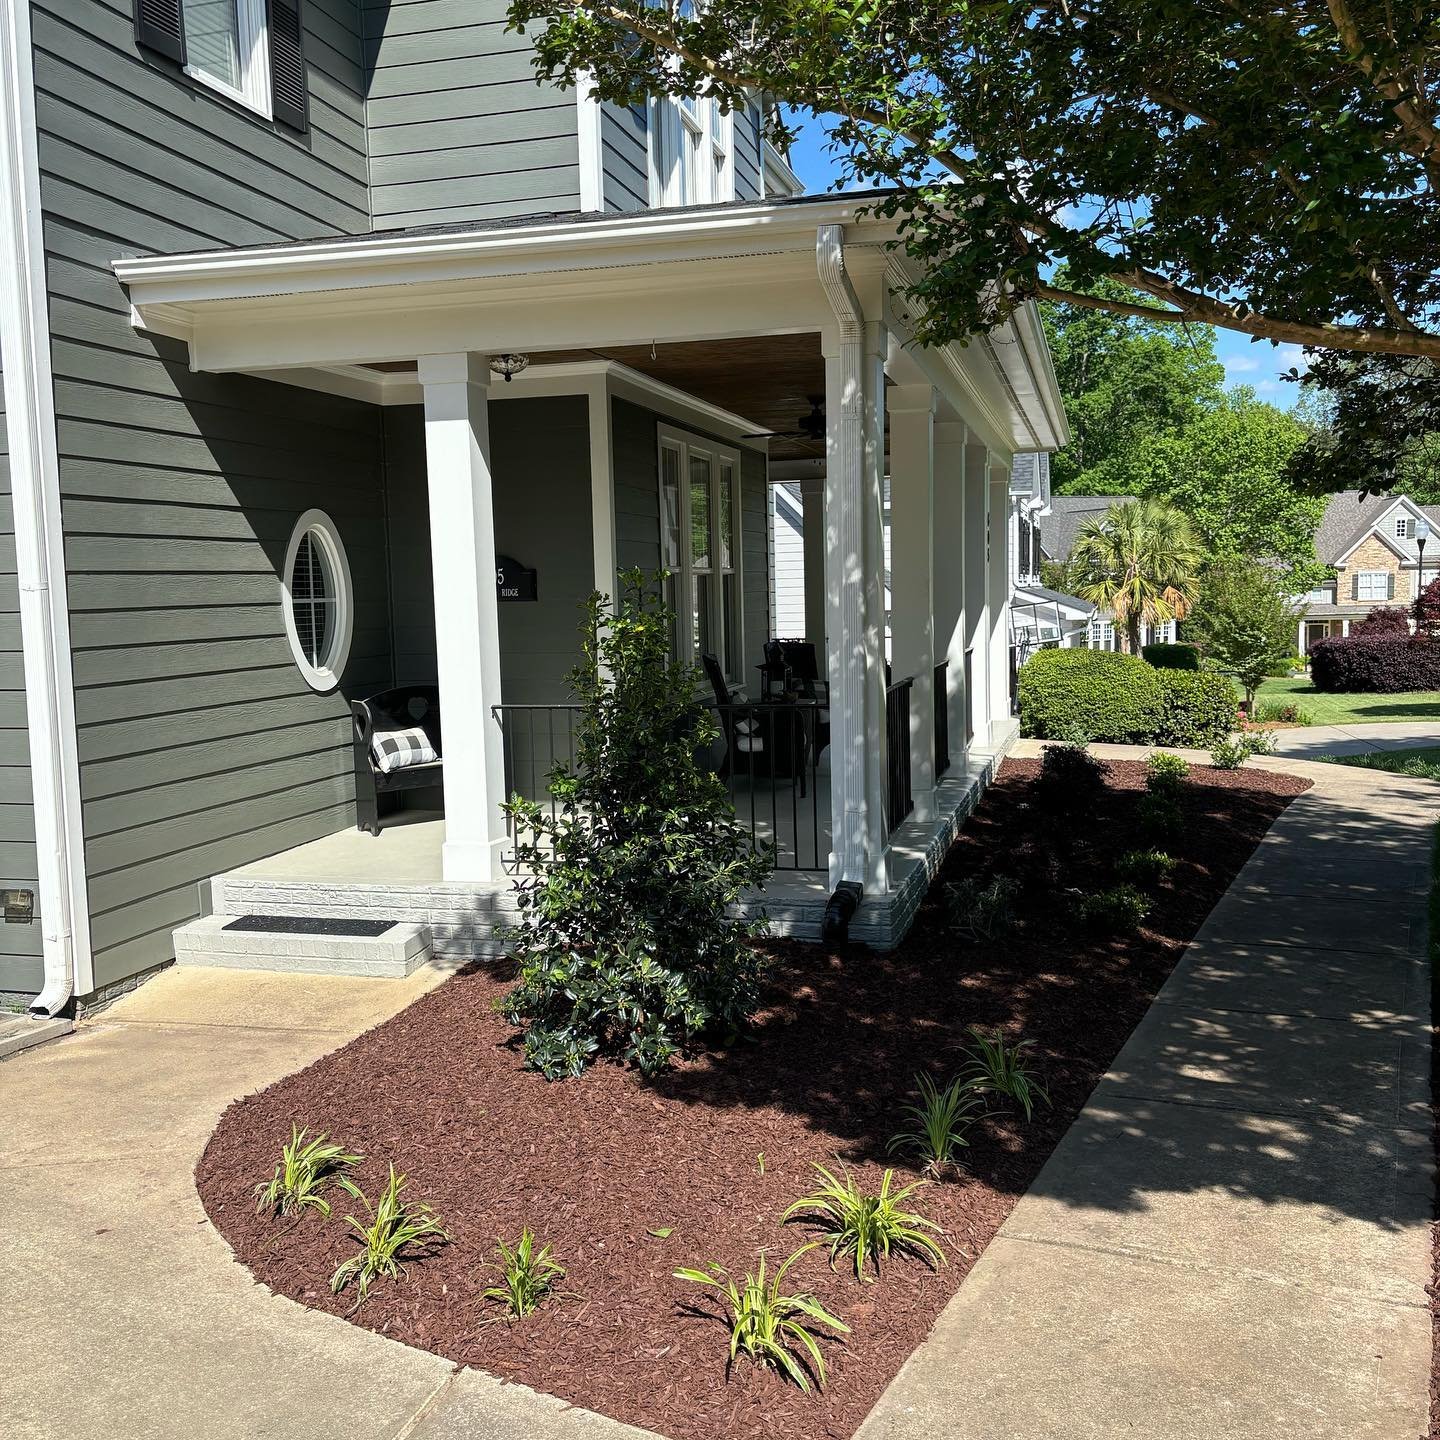 Swipe to see the before and after of our most recent landscape installation🌳☀️

☎️(910) 890-8080
💻higginslandscape.com

#landscape #landscapeinstallation #nc